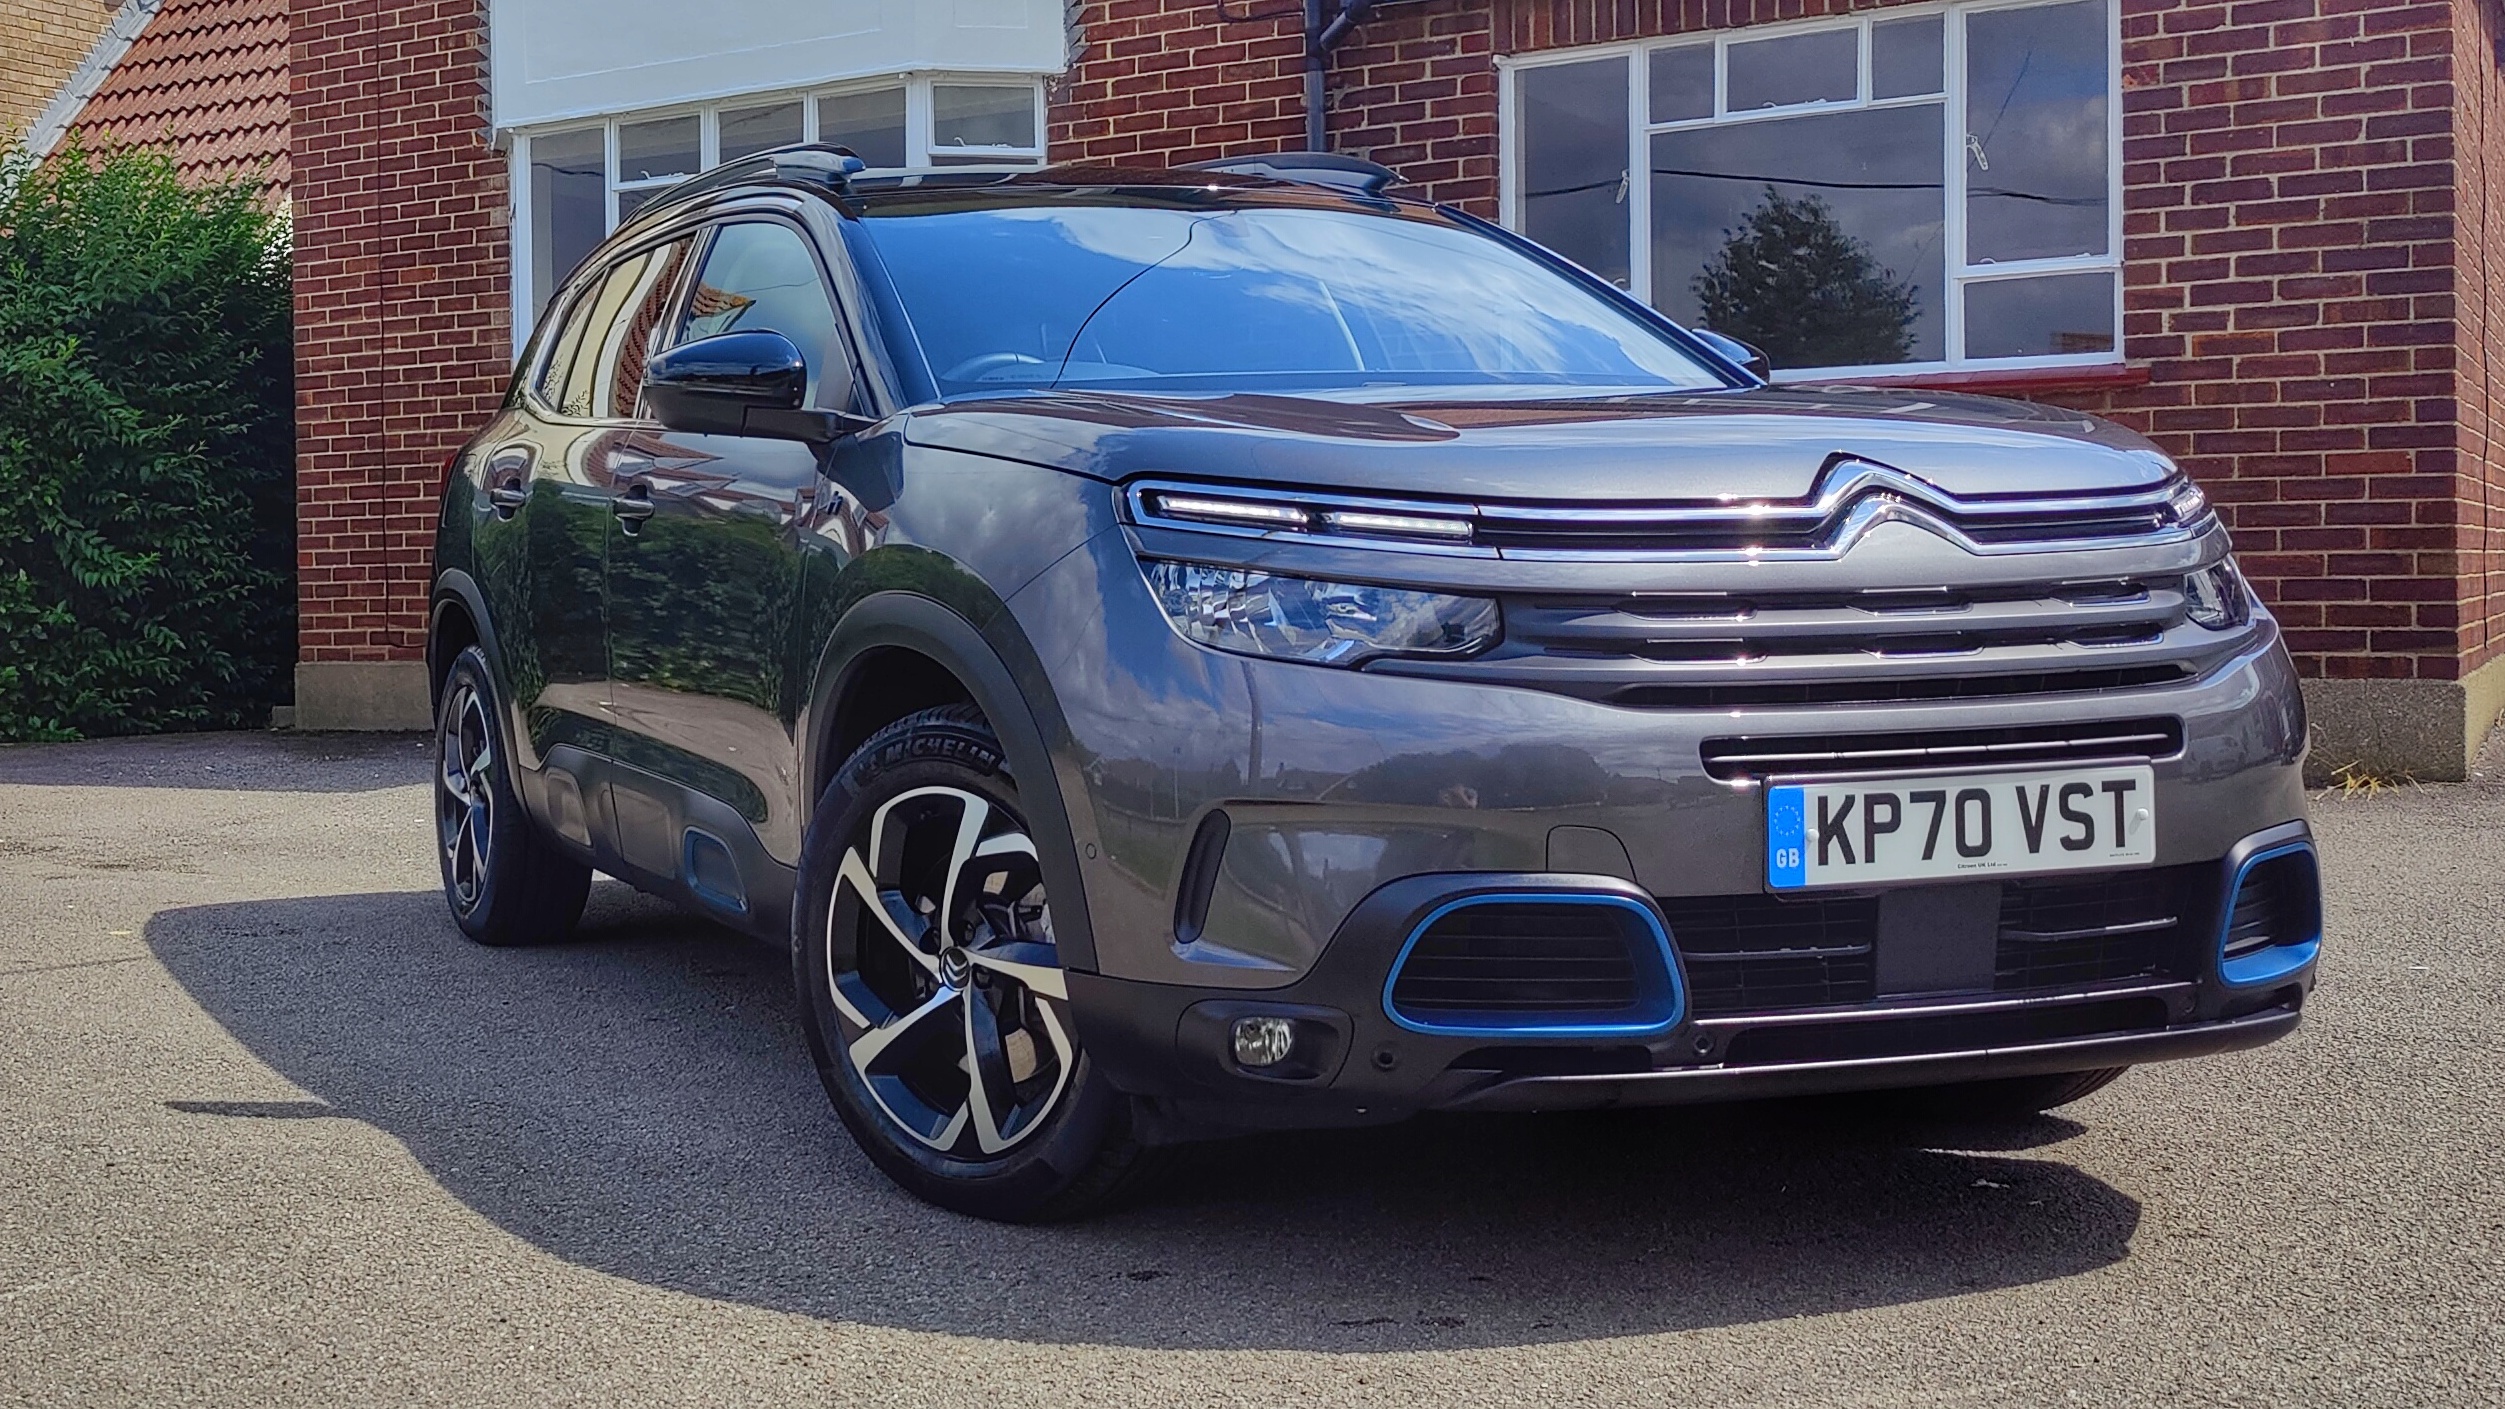 New Citroën C5 Aircross Plug-In Hybrid, the ultimate experience of comfort  